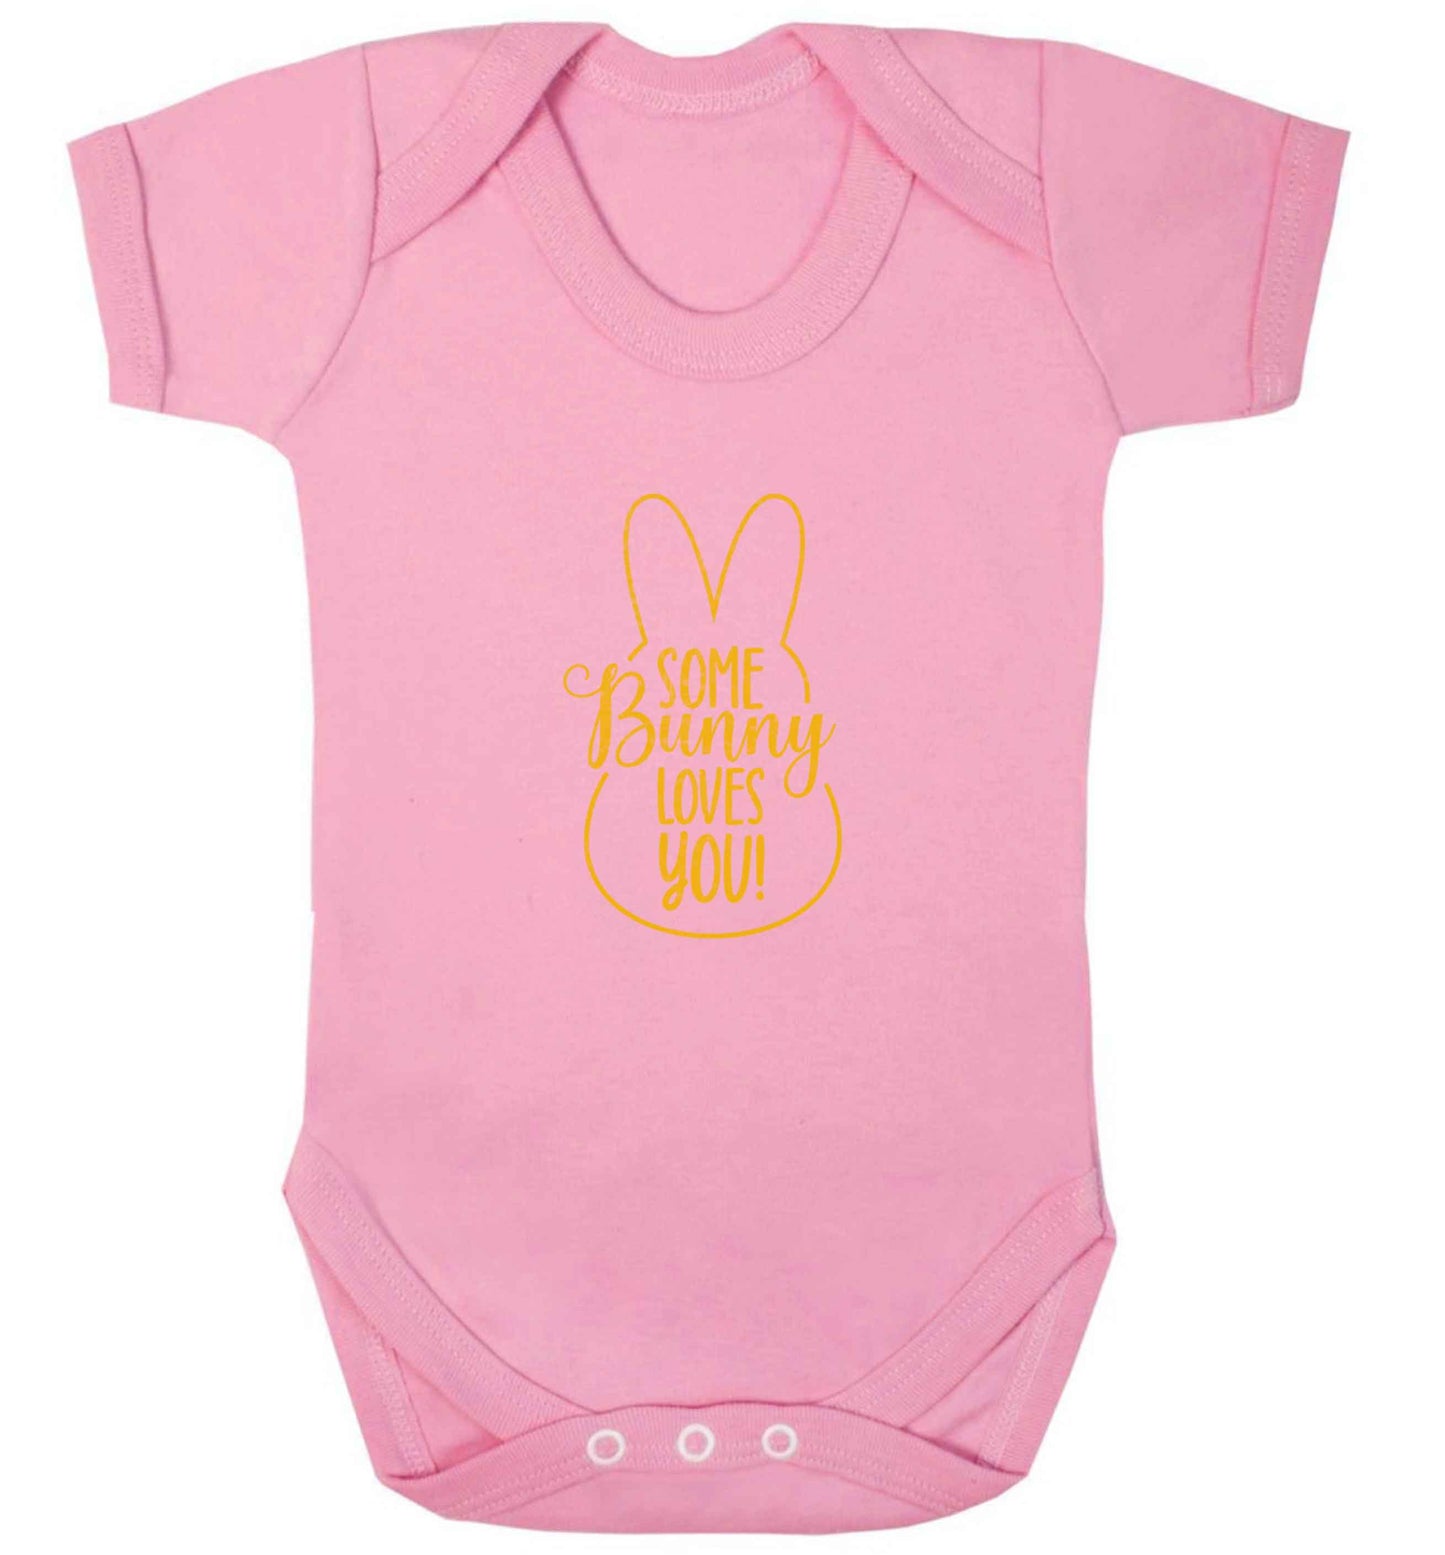 Some bunny loves you baby vest pale pink 18-24 months